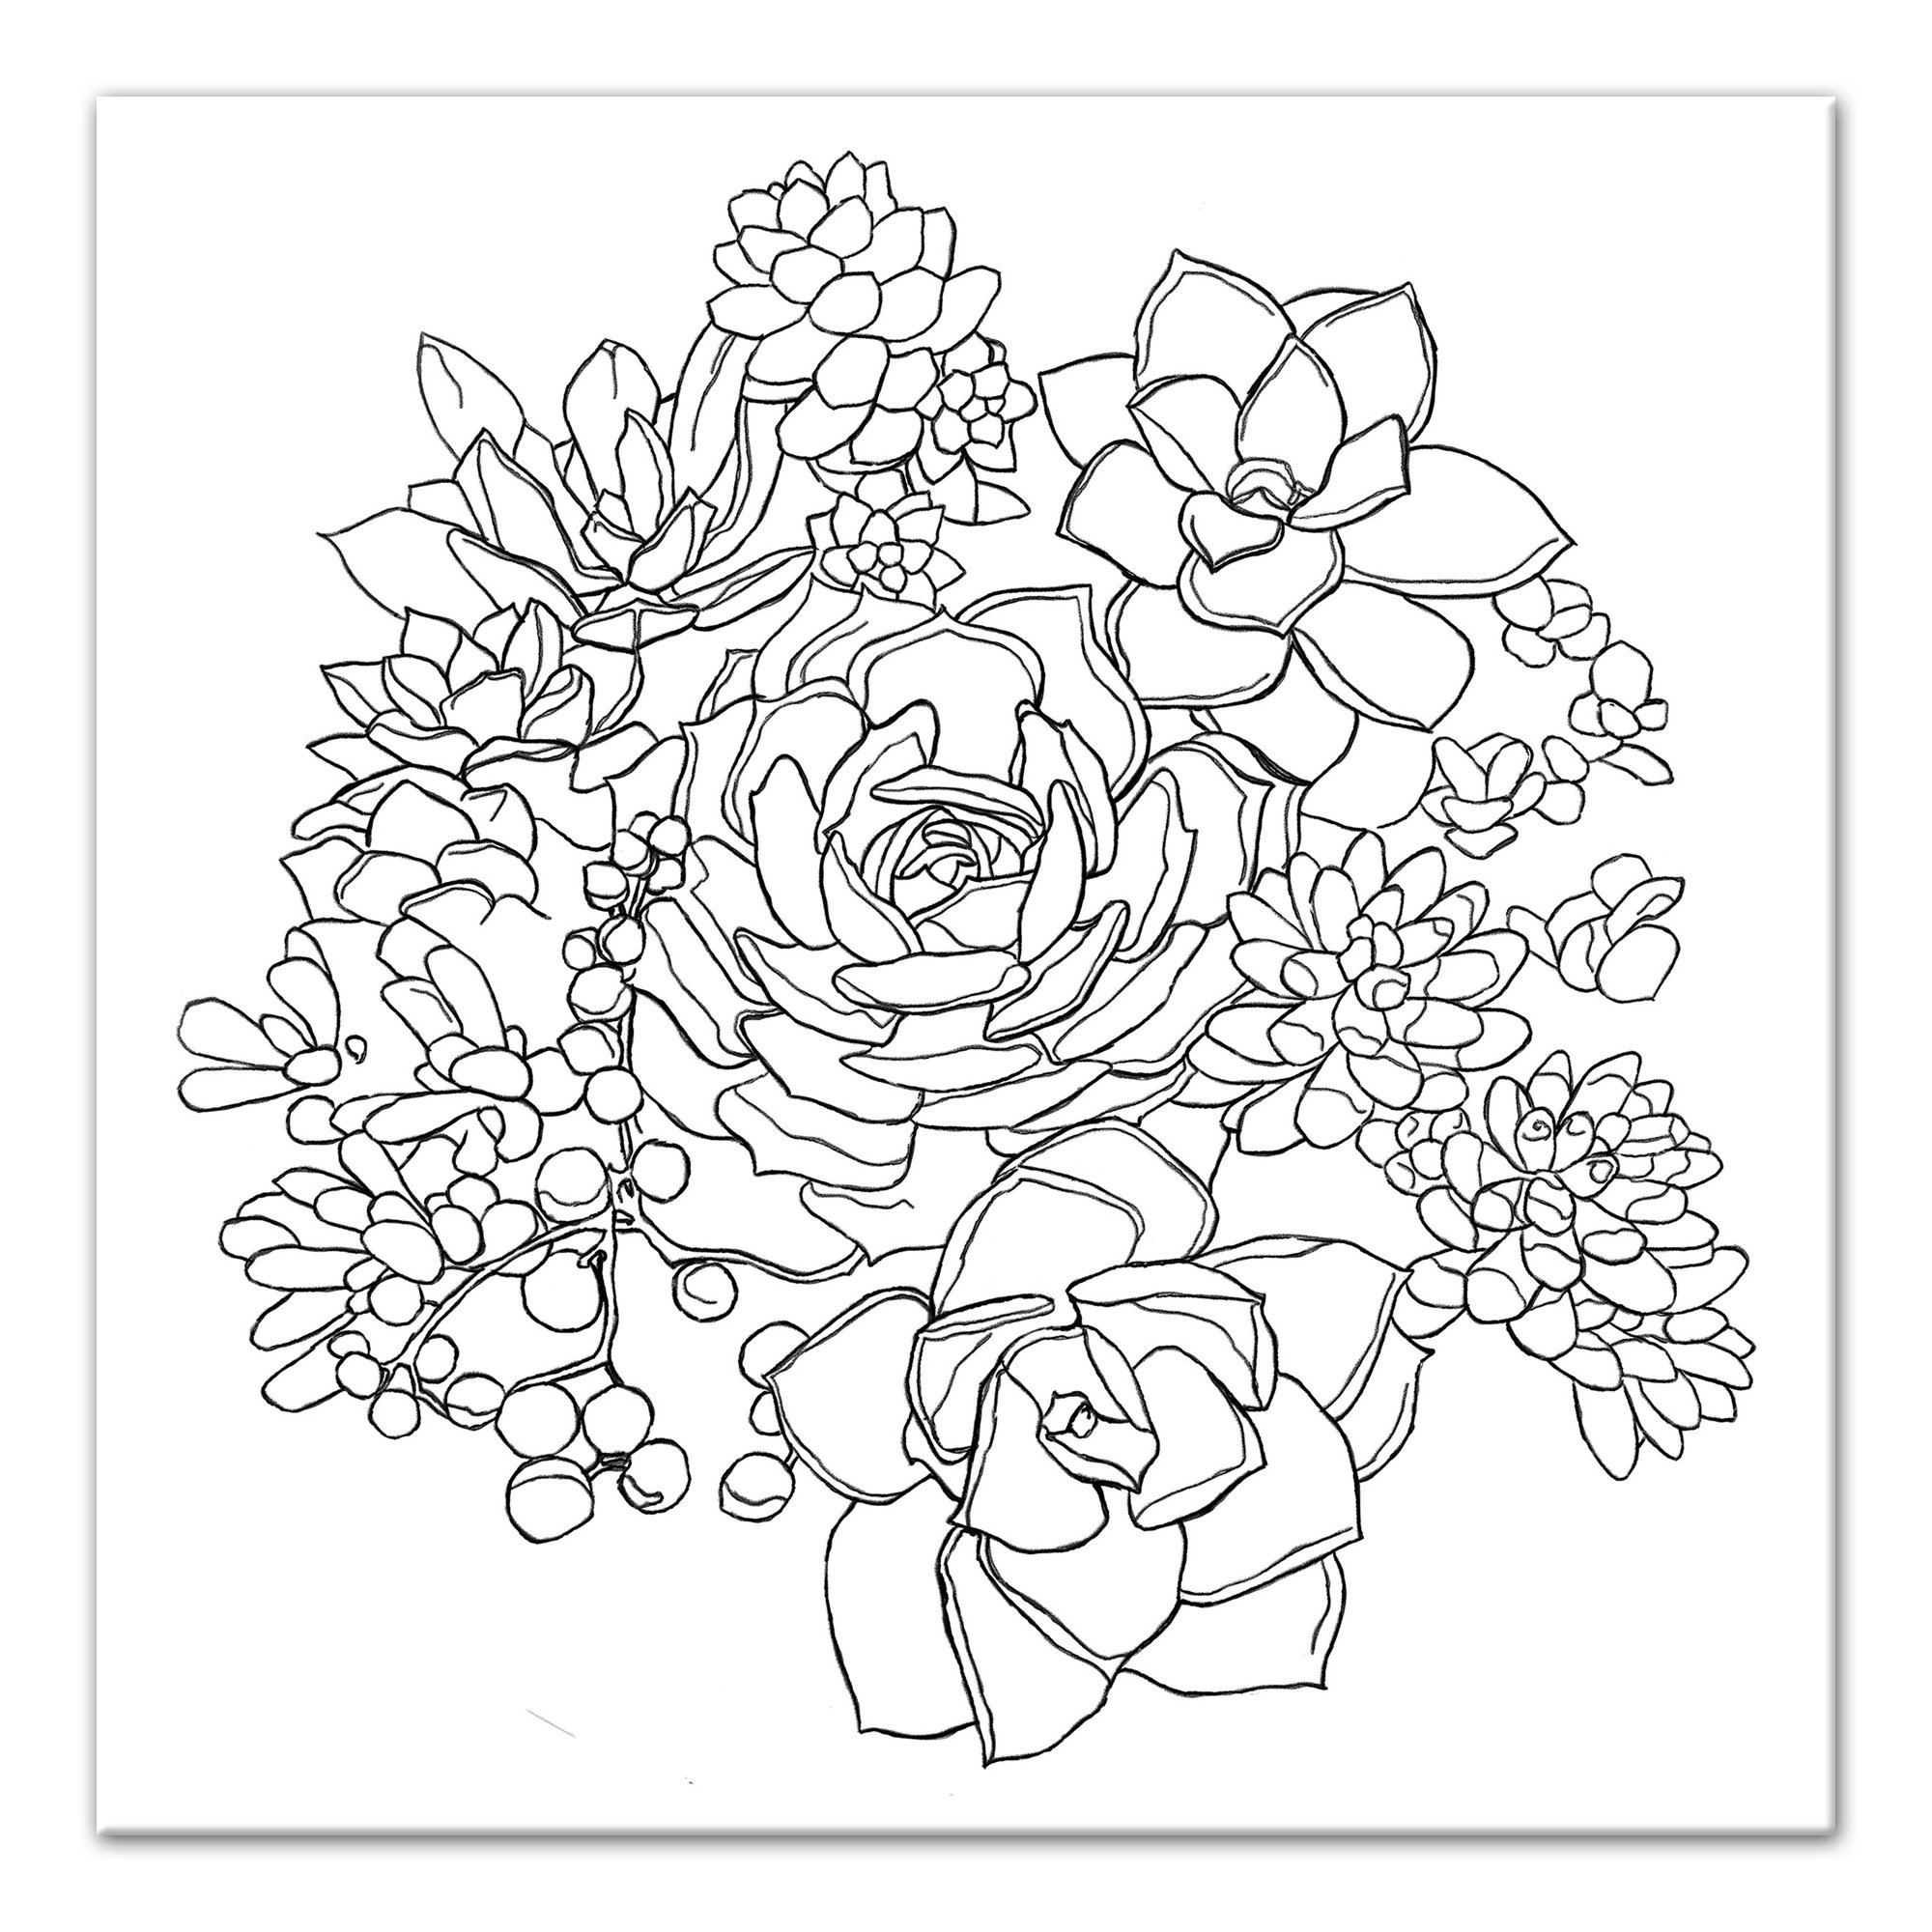 Succulent Line Drawing at Explore collection of